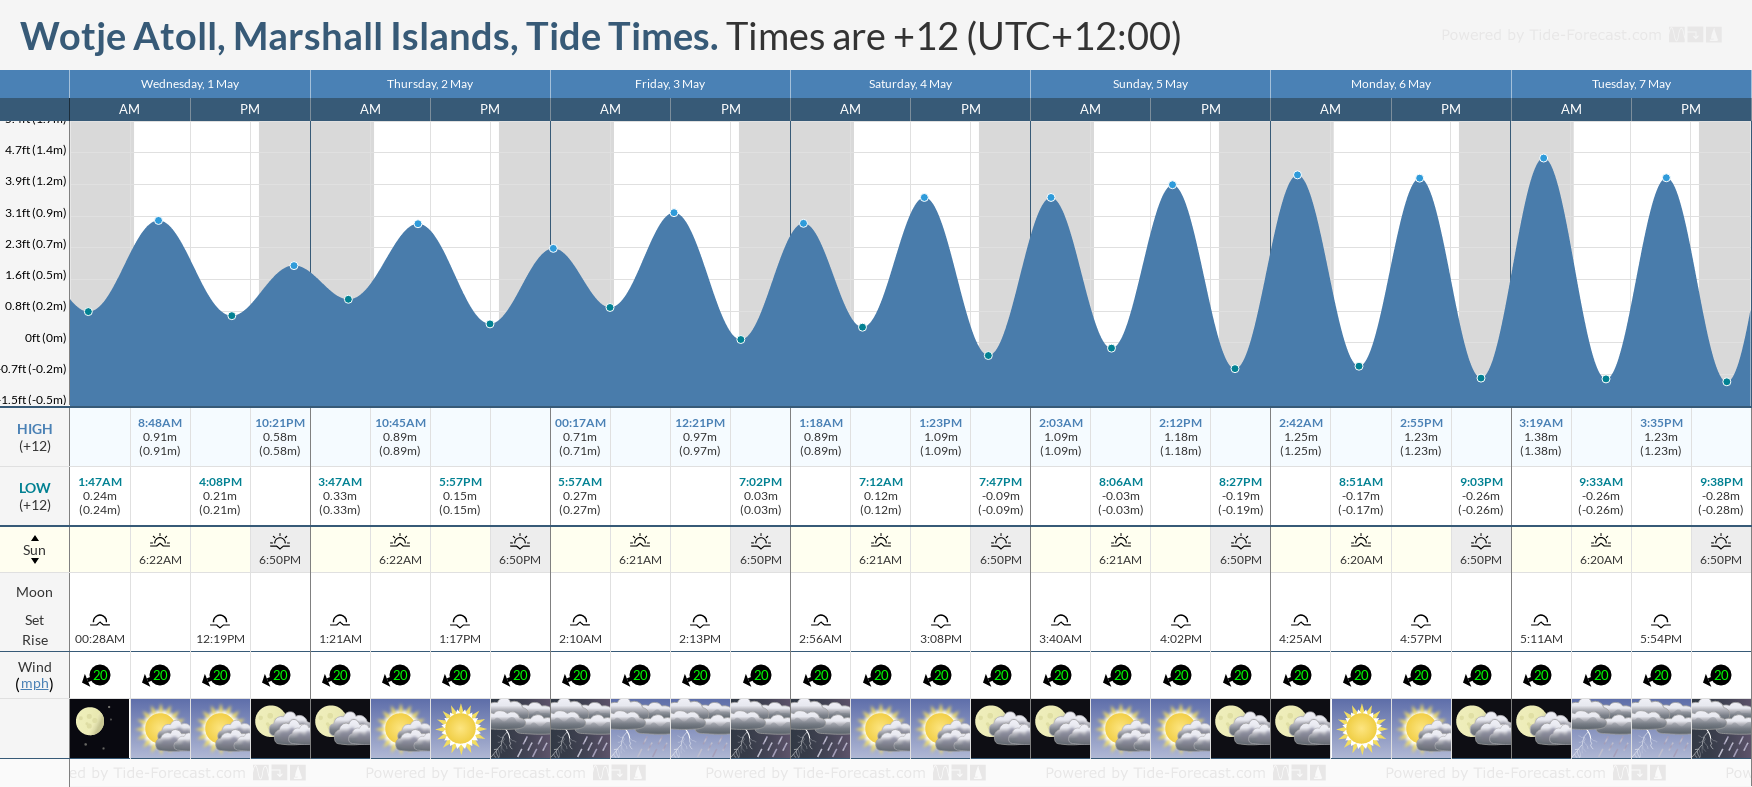 Wotje Atoll, Marshall Islands Tide Chart including high and low tide tide times for the next 7 days